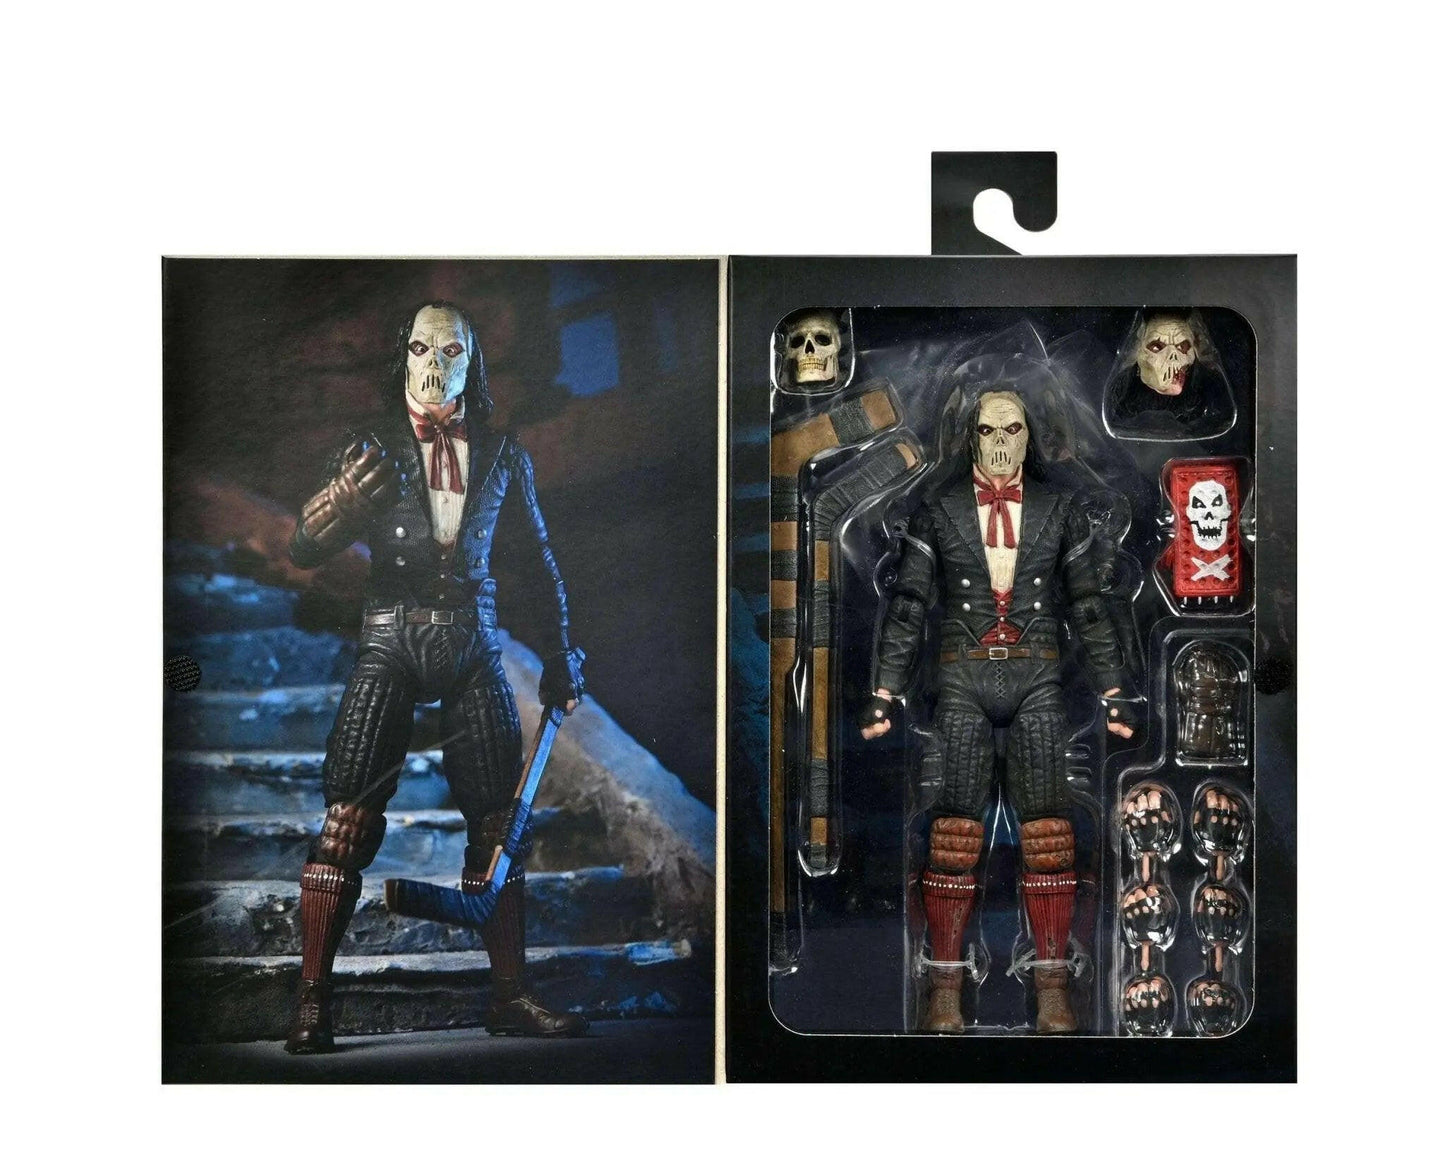 NECA Universal Monsters x TMNT Actionfigur Ultimate Casey as Phantom of the Opera 18cm - Toy-Storage